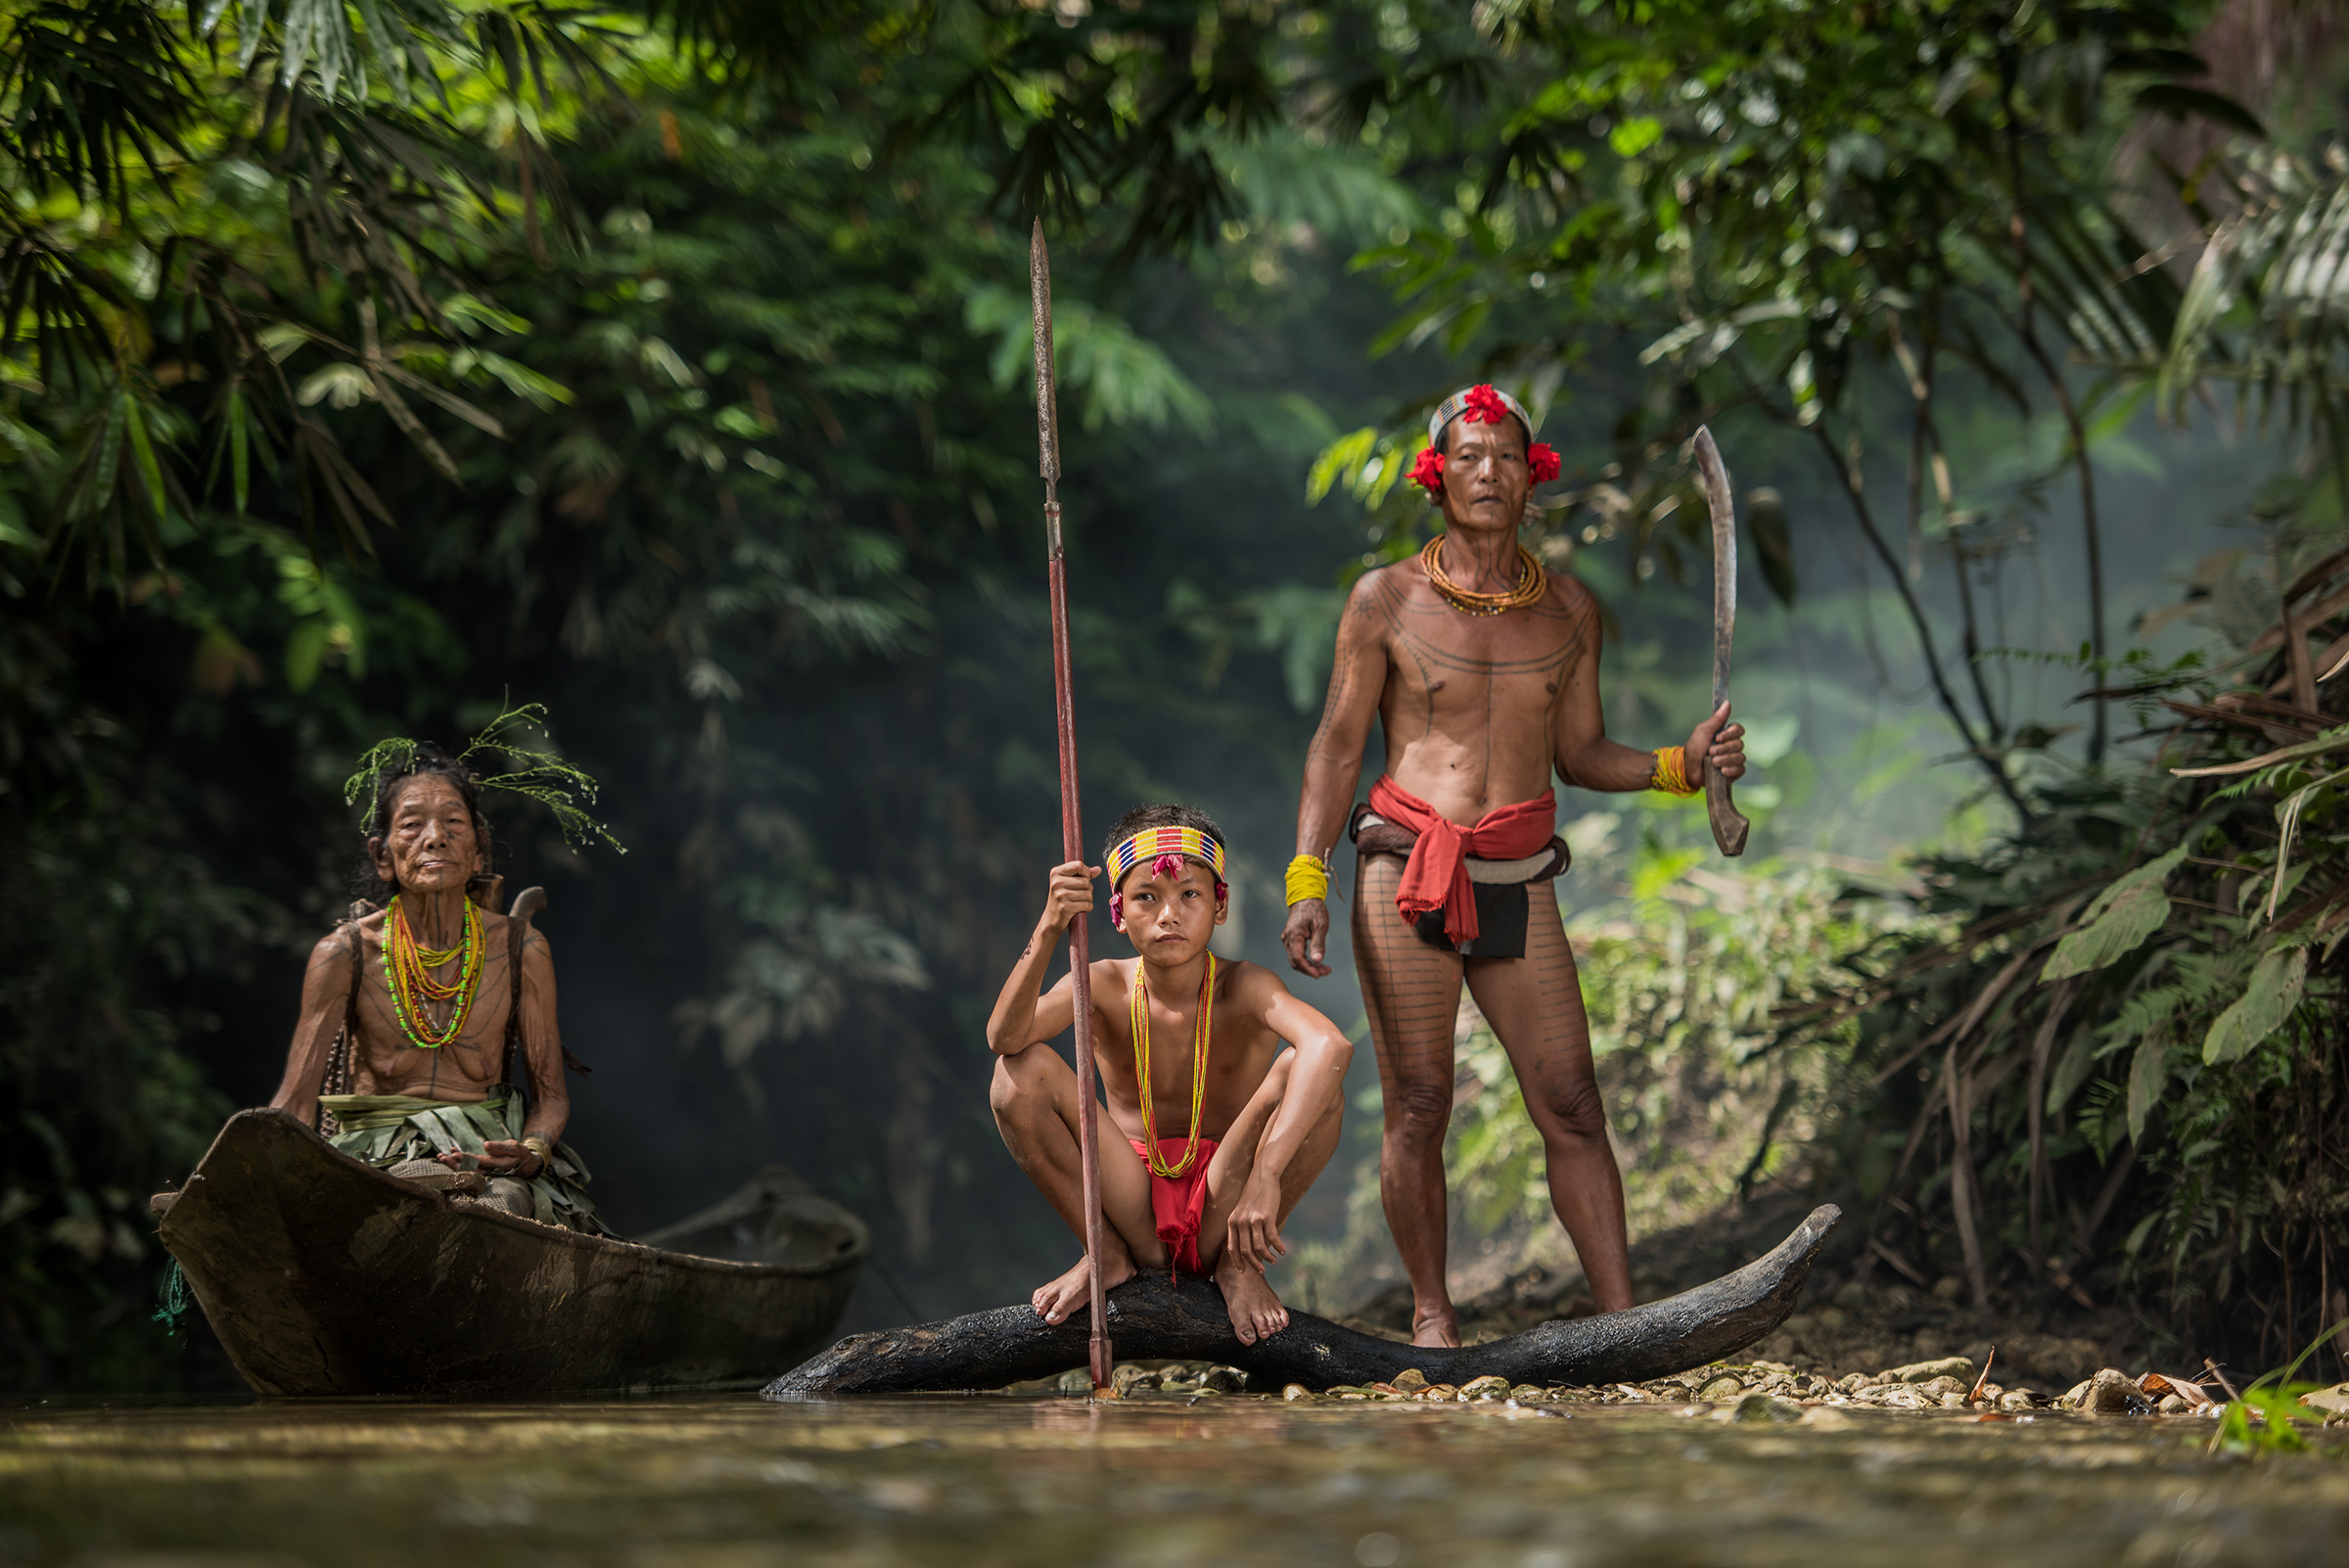 Fishing of Mentawai.The Indigenous inhabitants ethnic of the islands in Muara Siberut are also known as the Mentawai people. West Sumatra, Siberut island, Indonesia.